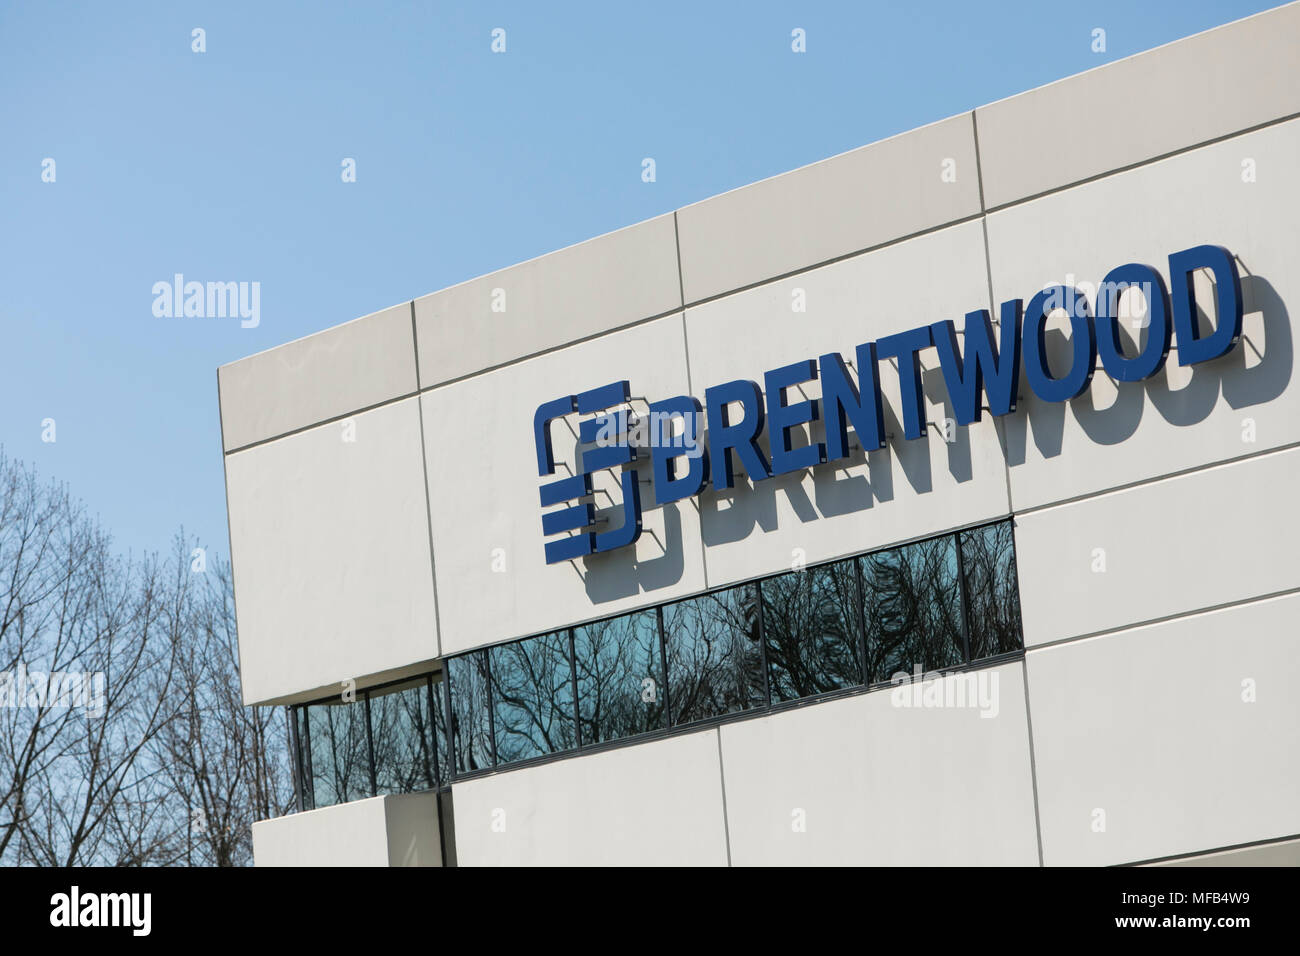 A logo sign outside of a facility occupied by Brentwood Industries Inc., in Reading, Pennsylvania, on April 22, 2018. Stock Photo